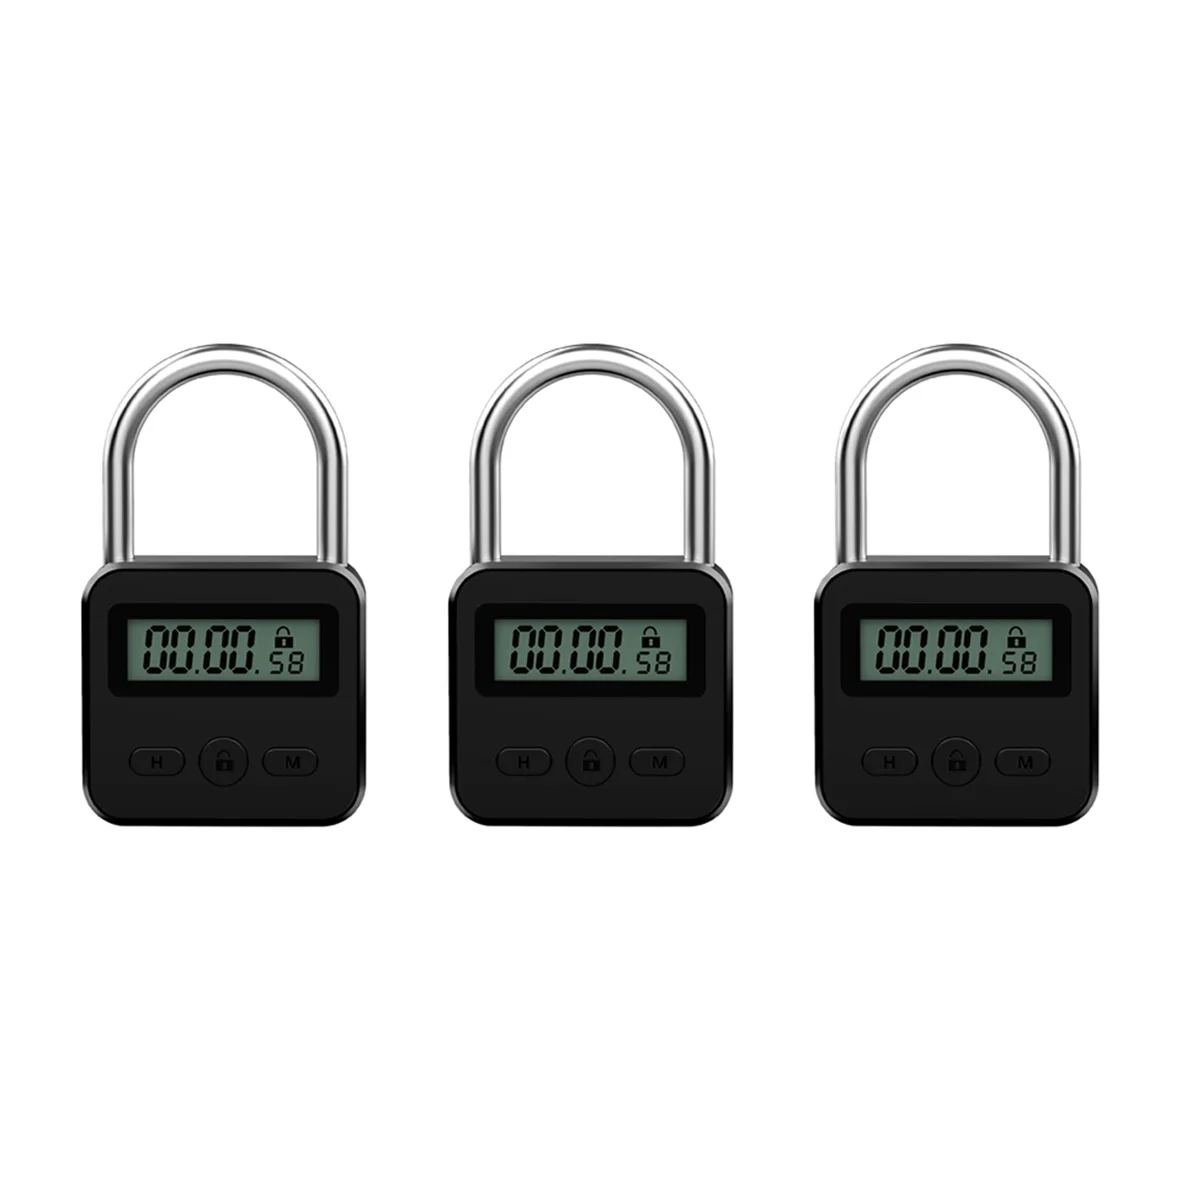 

3X Metal Timer Lock LCD Display Multi-Function Electronic Time 99 Hours Max Timing USB Rechargeable Timer Padlock,Black